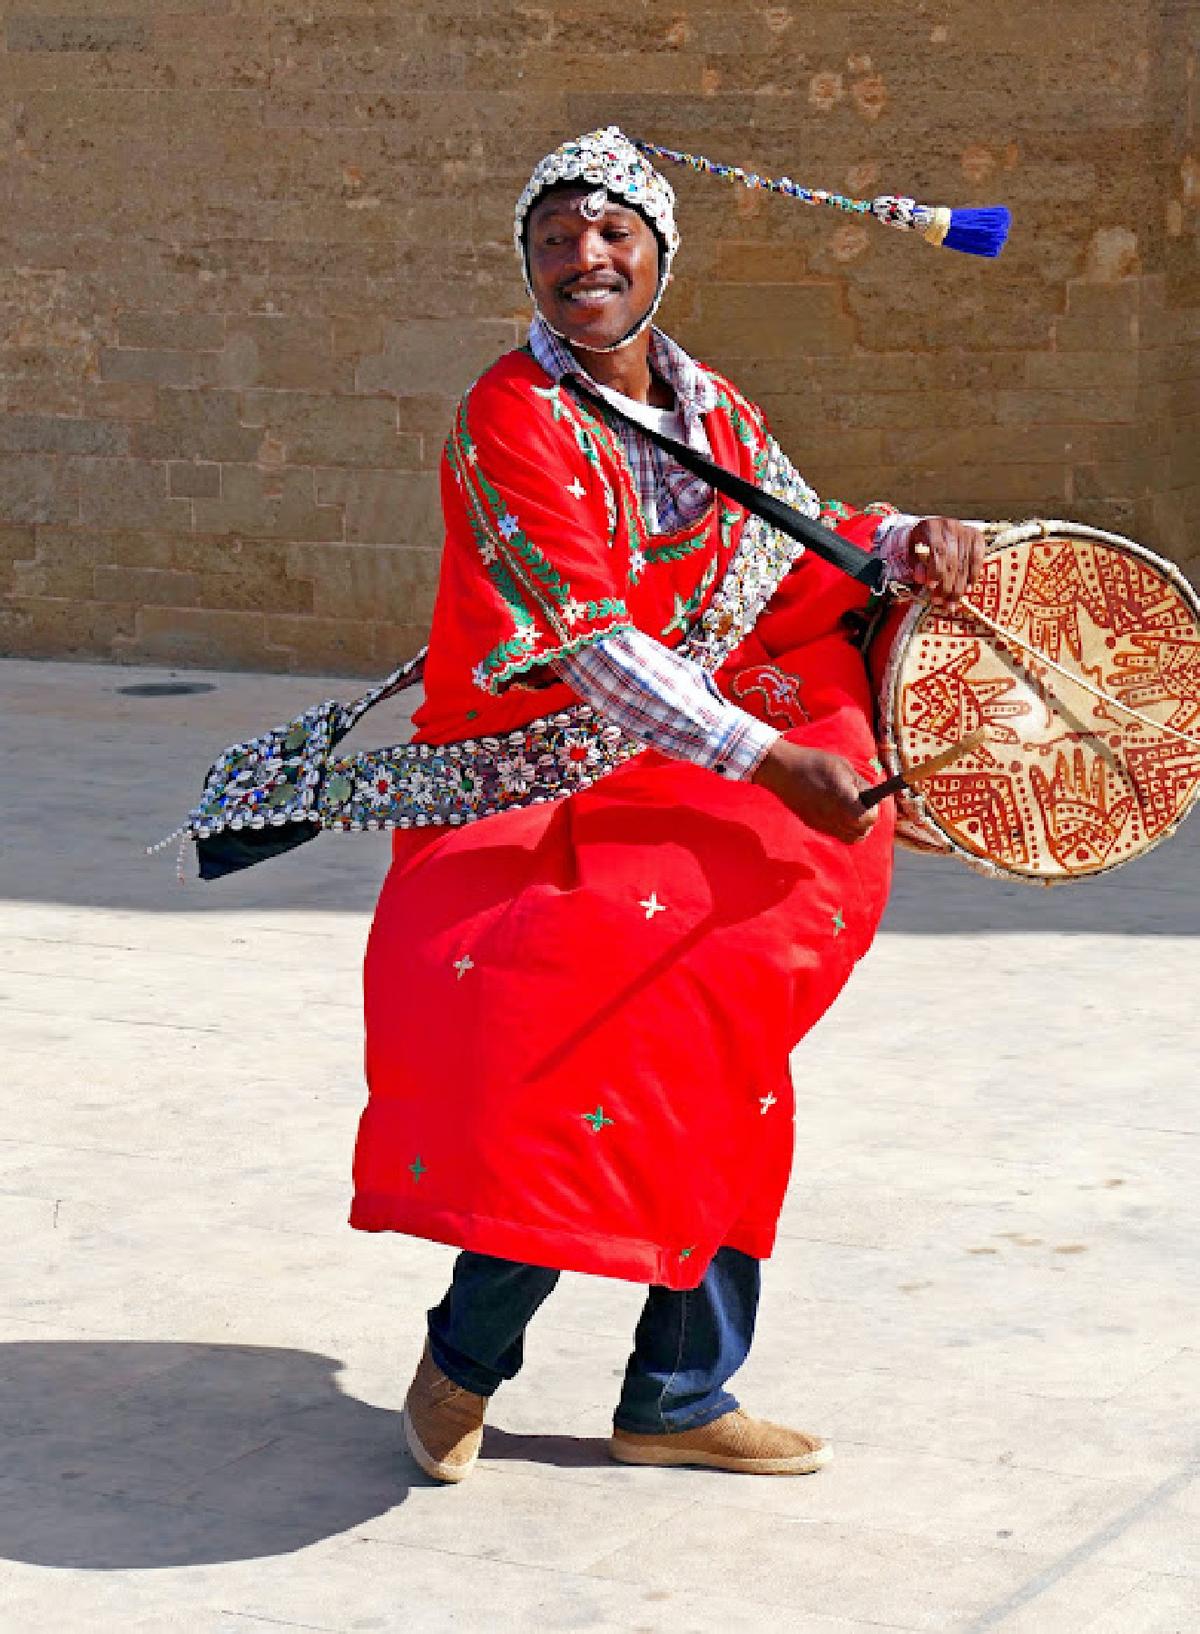 A gnawa musician plays and sings outside the Kasbah des Oudaias in Rabat, Morocco. (Photo courtesy of Phil Allen.)